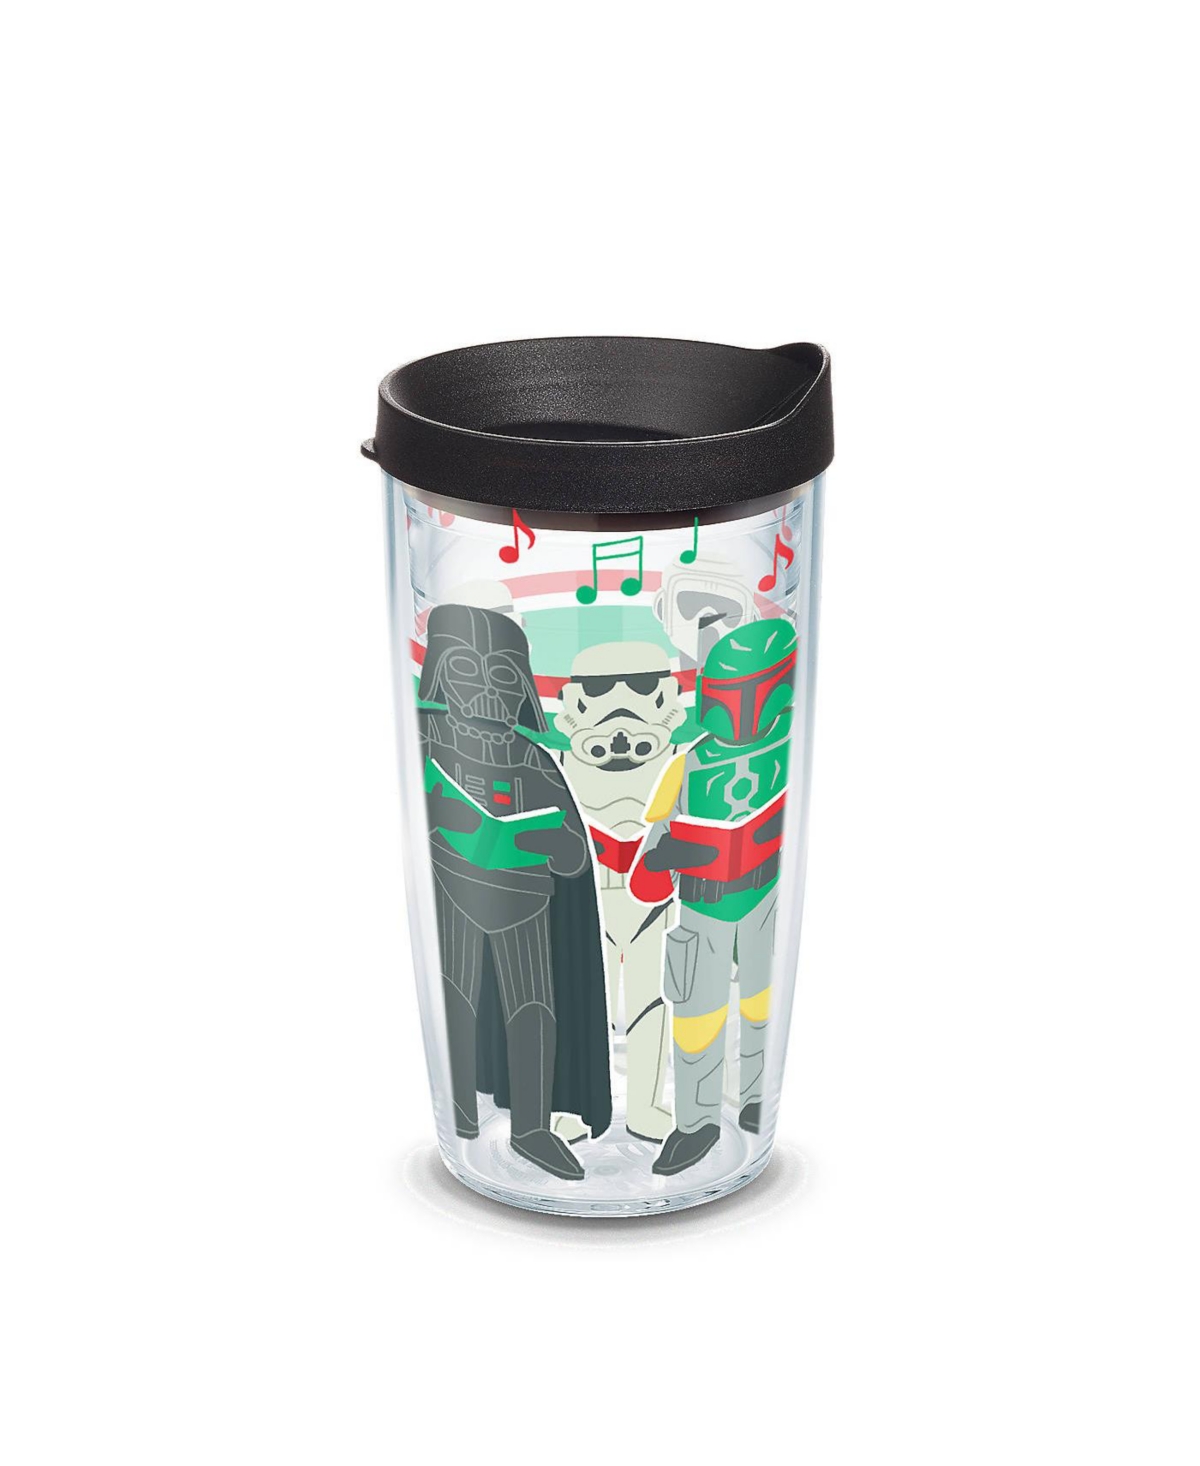 Tervis Tumbler Tervis Star Wars Holiday Carolling Made In Usa Double Walled Insulated Tumbler Travel Cup Keeps Drin In Open Miscellaneous